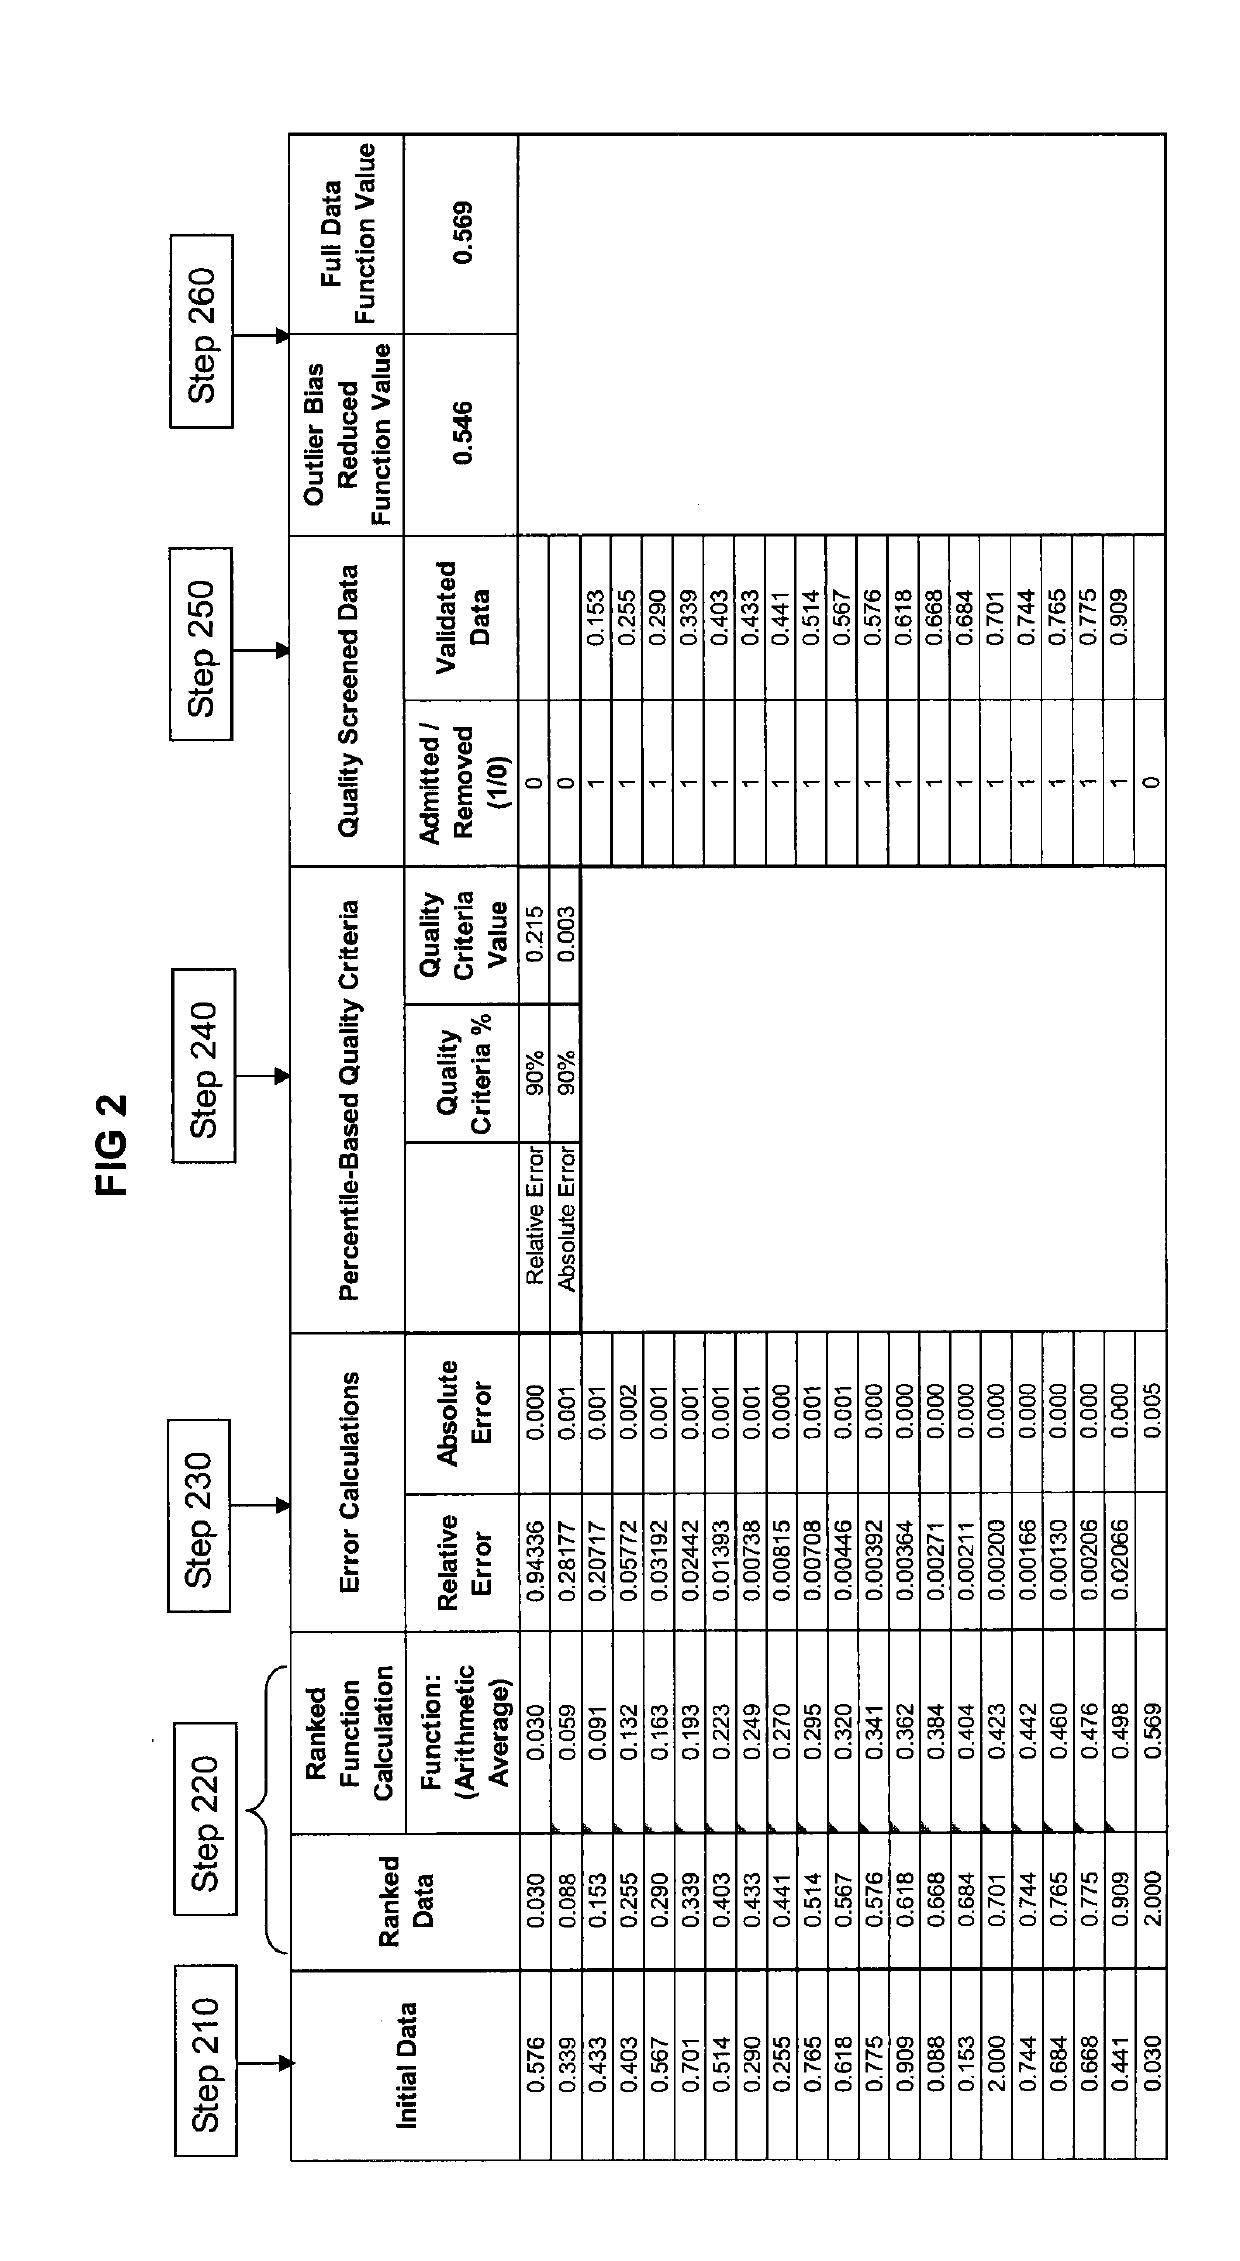 System and method for performing industrial processes across facilities